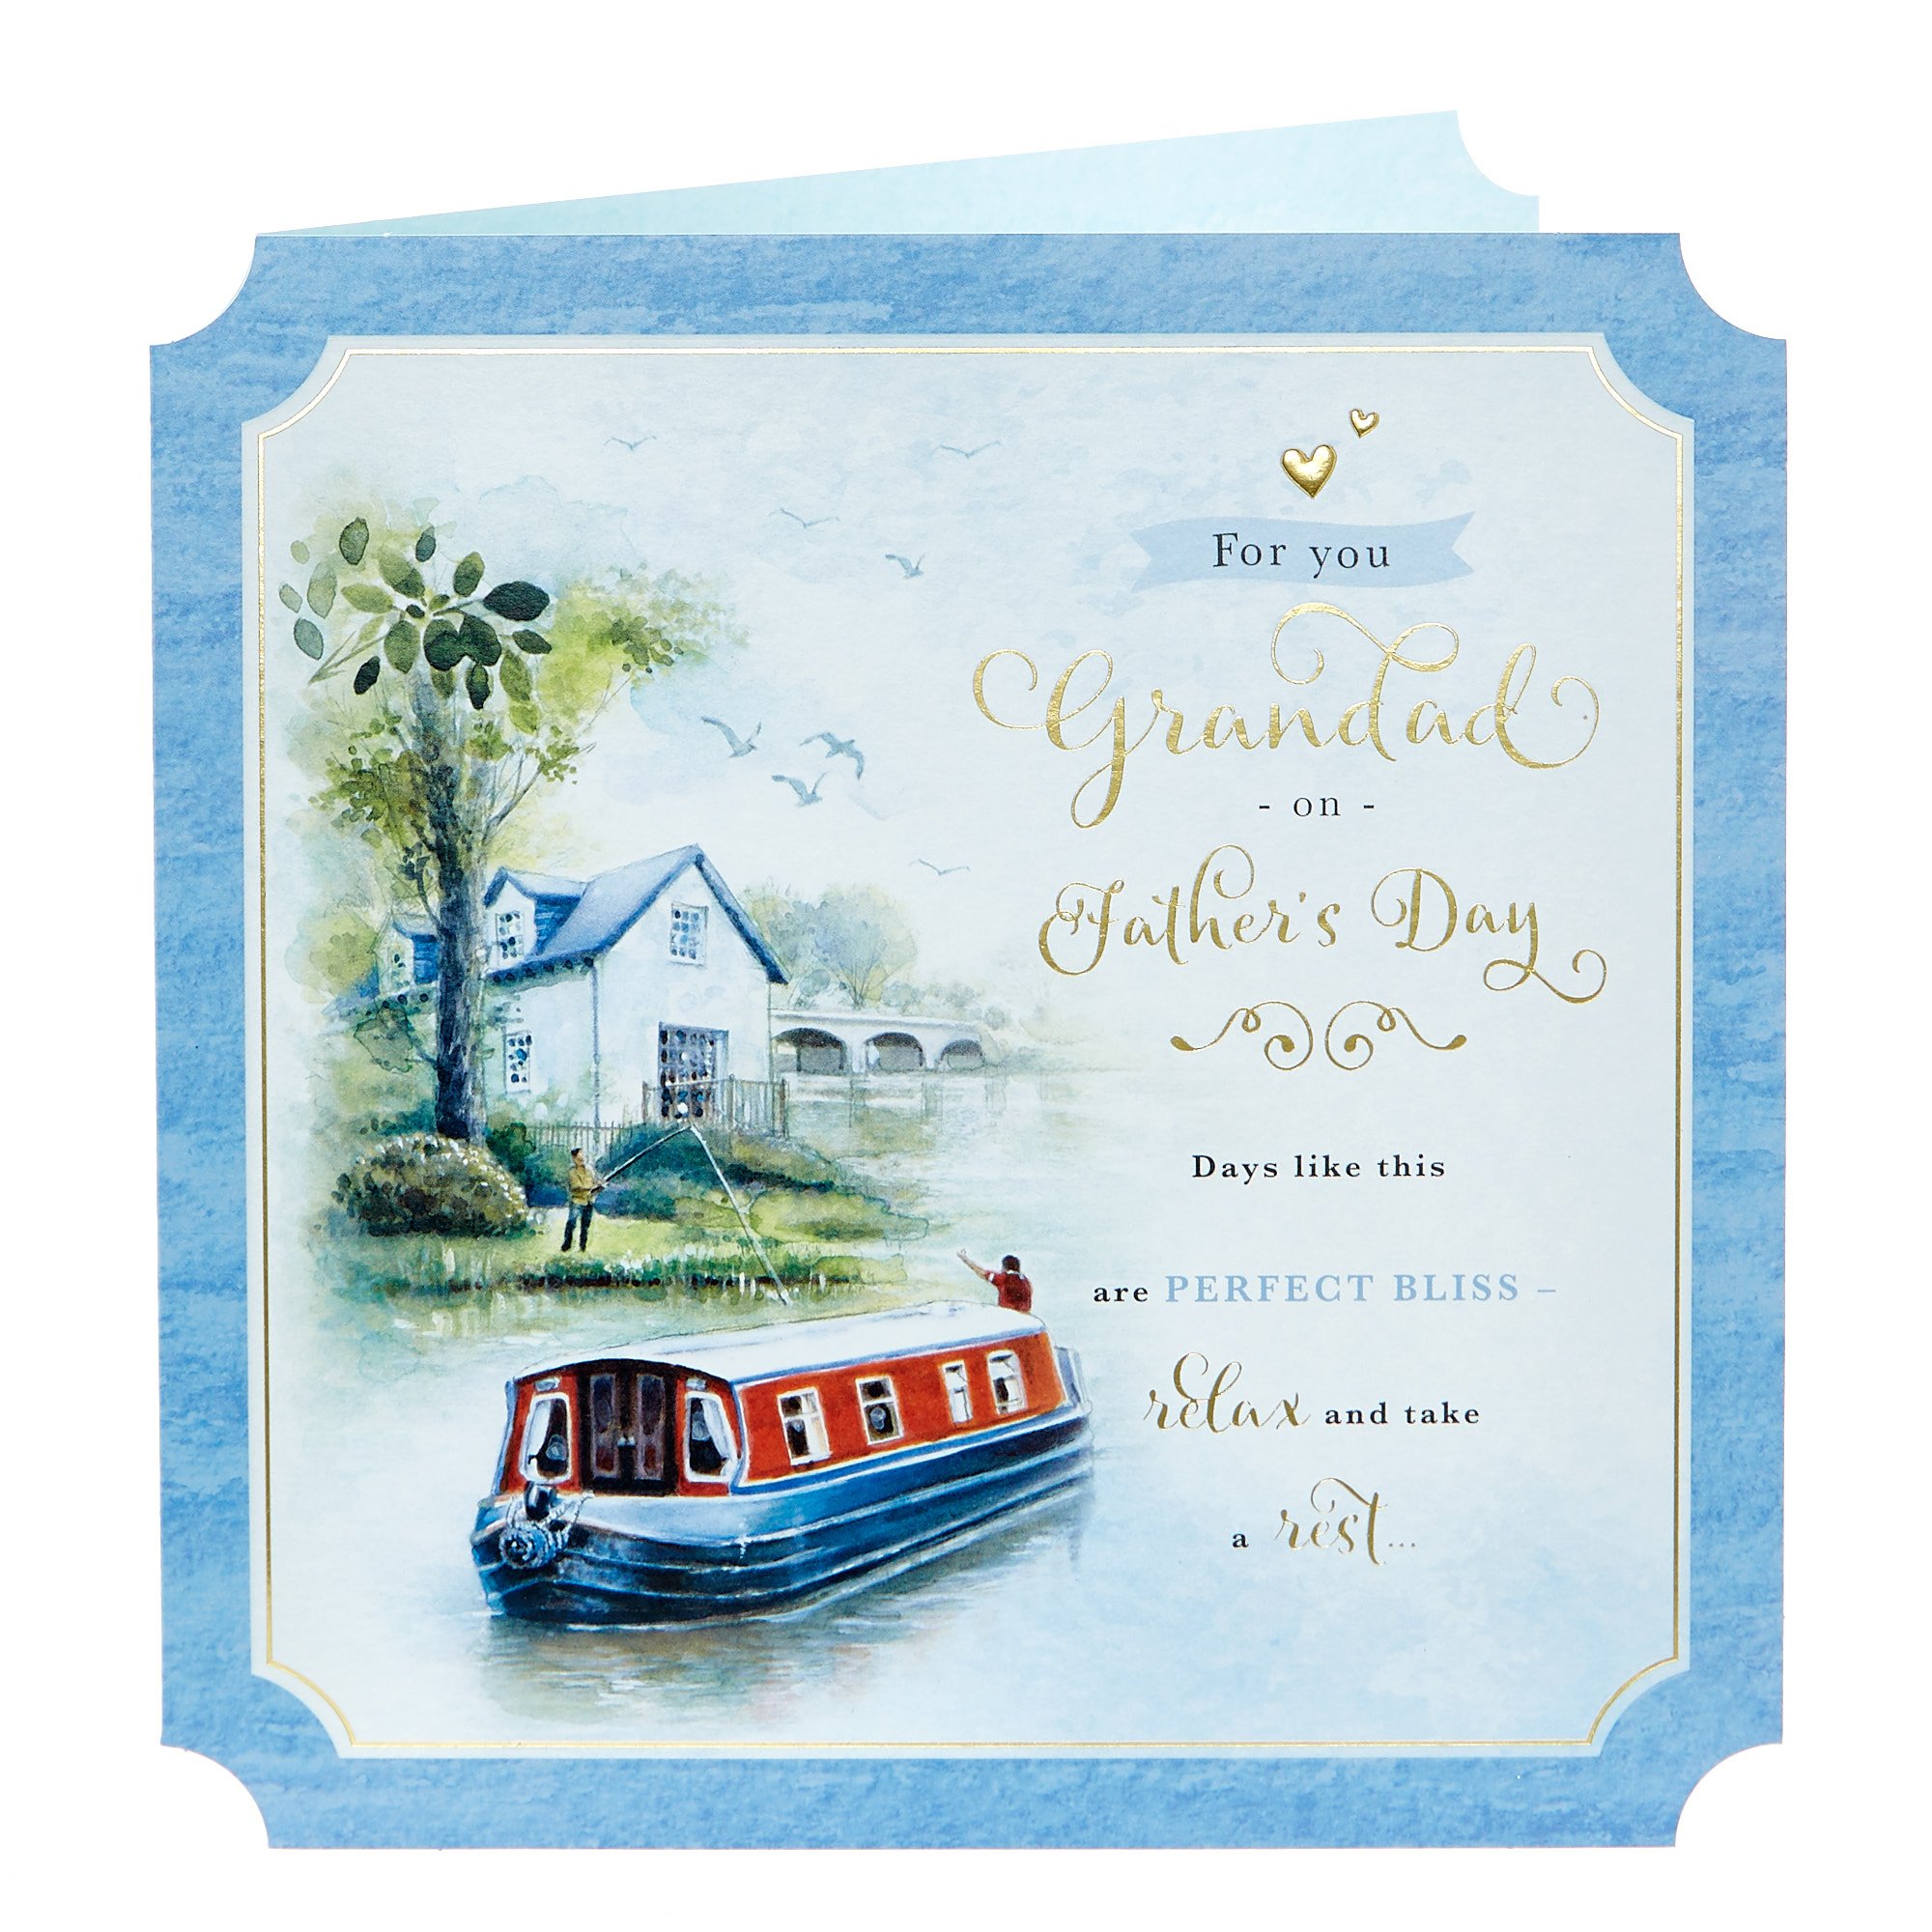 Platinum Collection Father's Day Card - For You Grandad